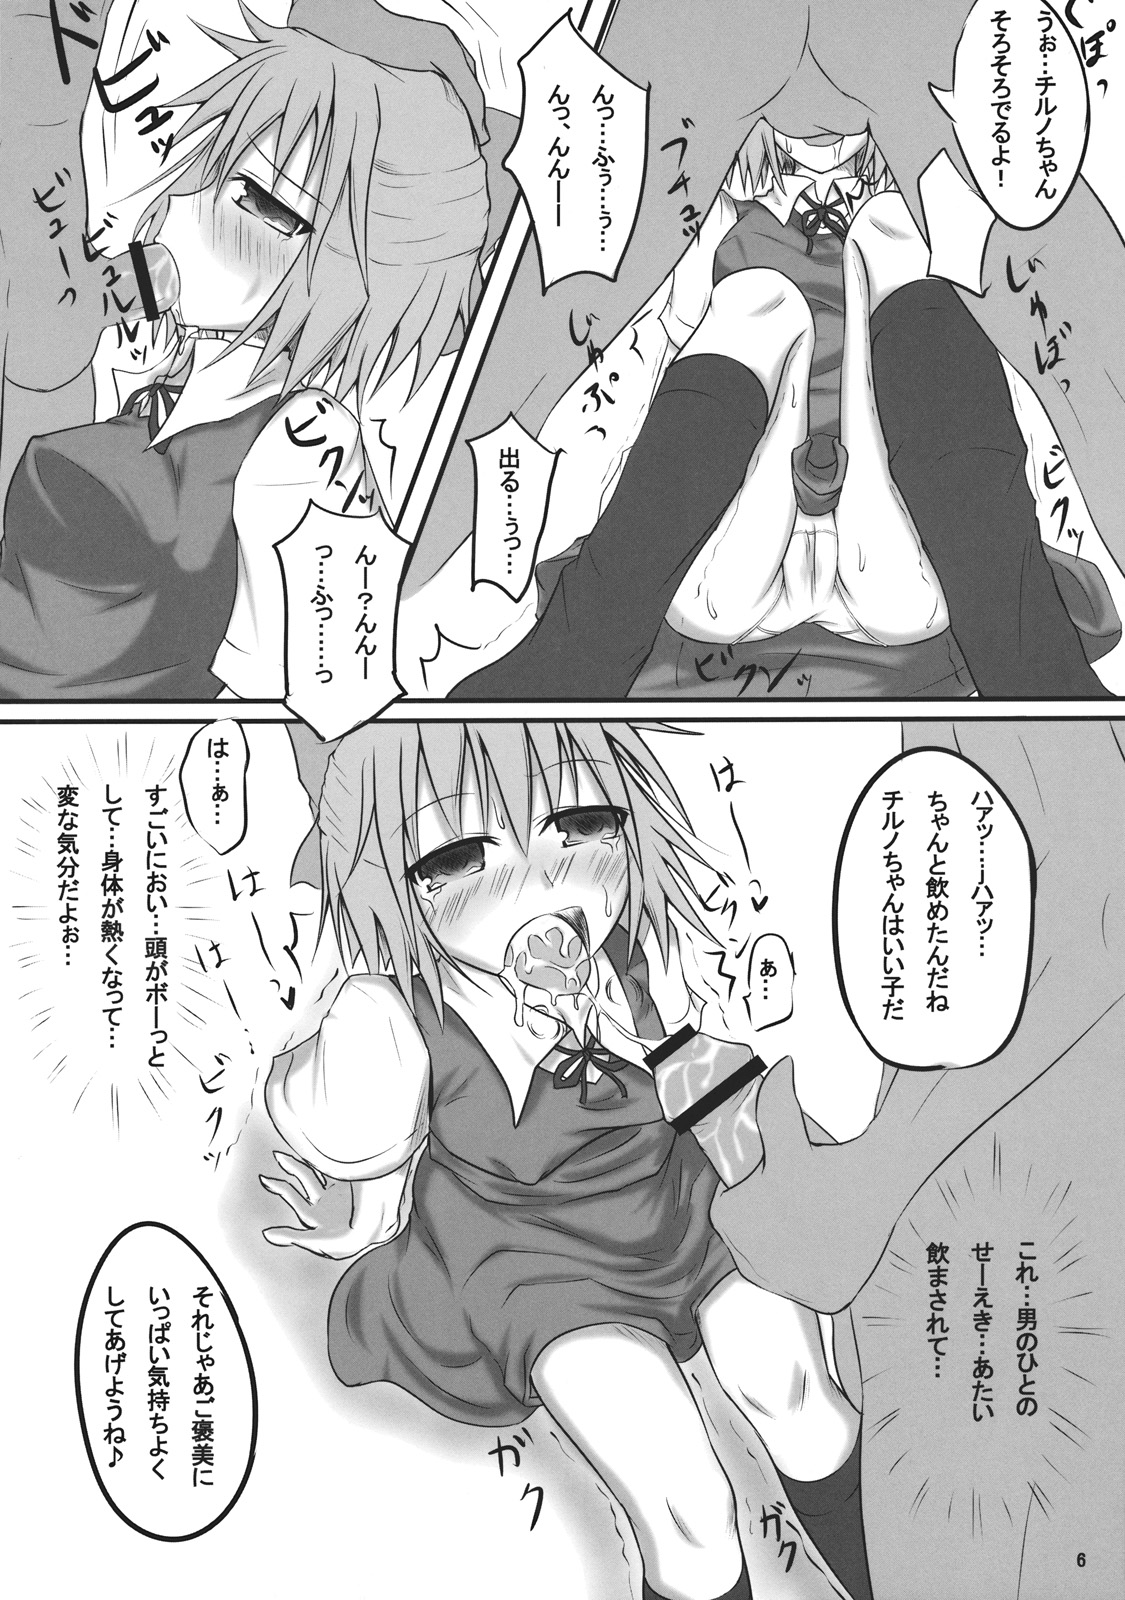 (Reitaisai 8) [Yume no Kage] Lunchi Pack (Touhou Project) (例大祭8) (同人誌) [夢の影] Lunchi Pack (東方)